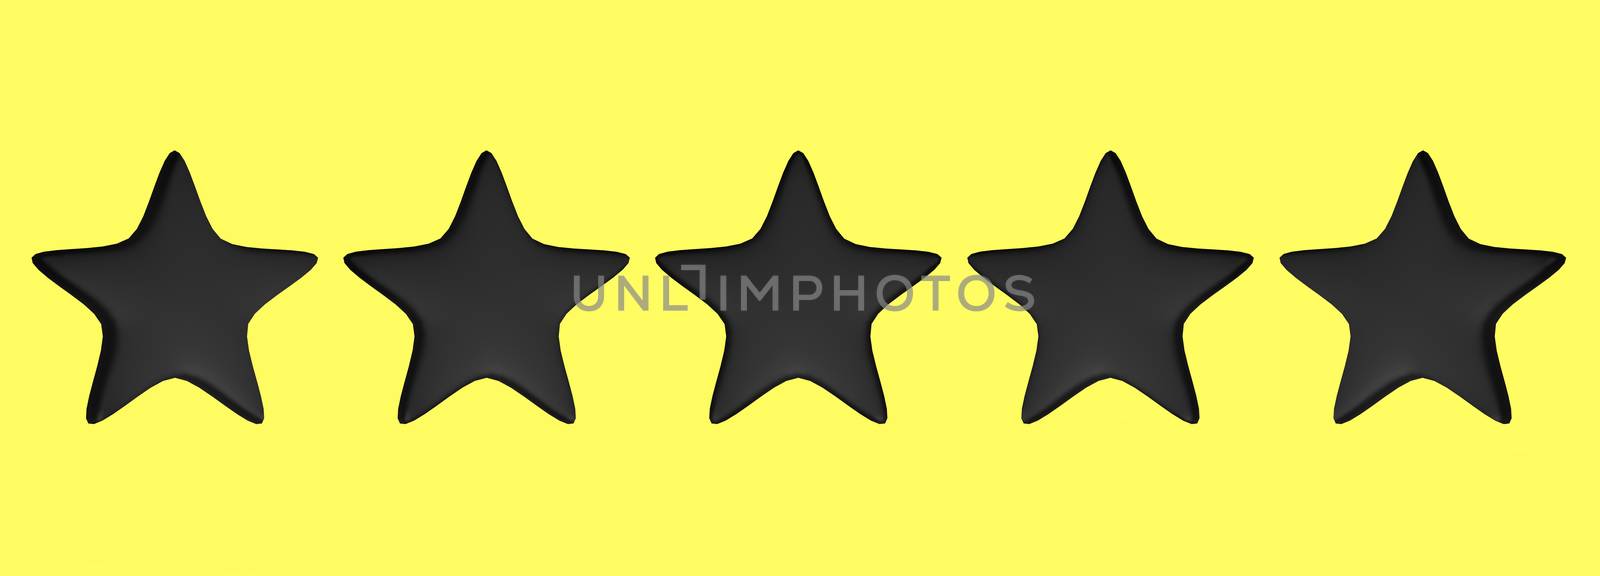 3d five yellow star on color background. Render and illustration of golden star for premium review by Andreajk3